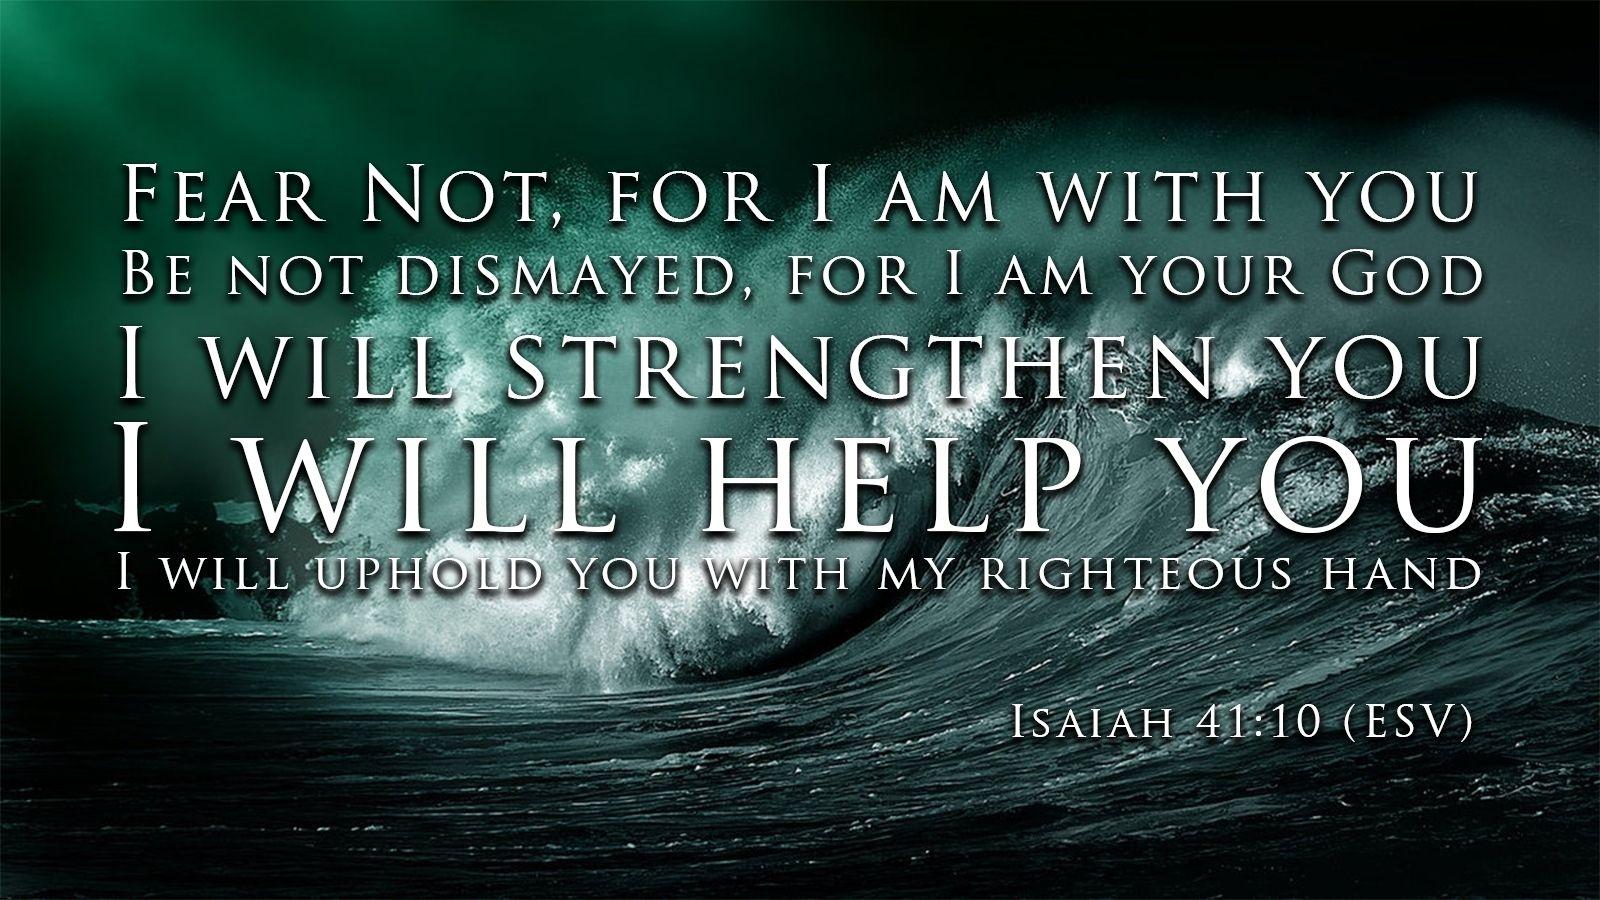 10 Latest Isaiah 41:10 Wallpapers FULL HD 1080p For PC Backgrounds.